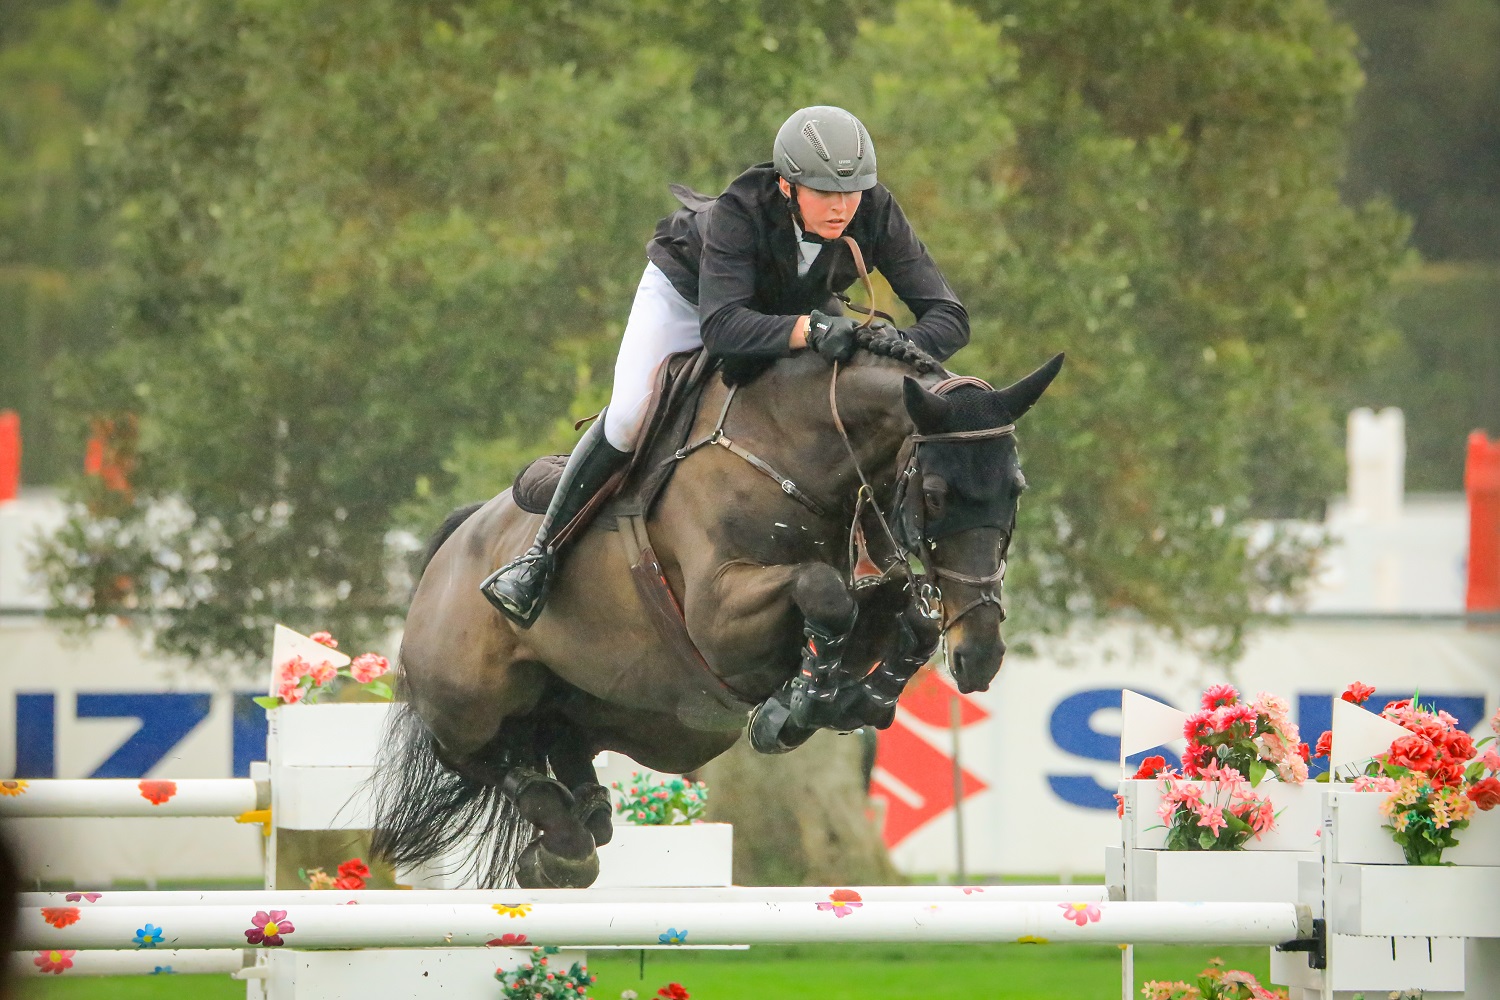 Jason Foley and Rockwell RC best in Hipotels Trophy Class at Sunshine Tour  - Equnews International